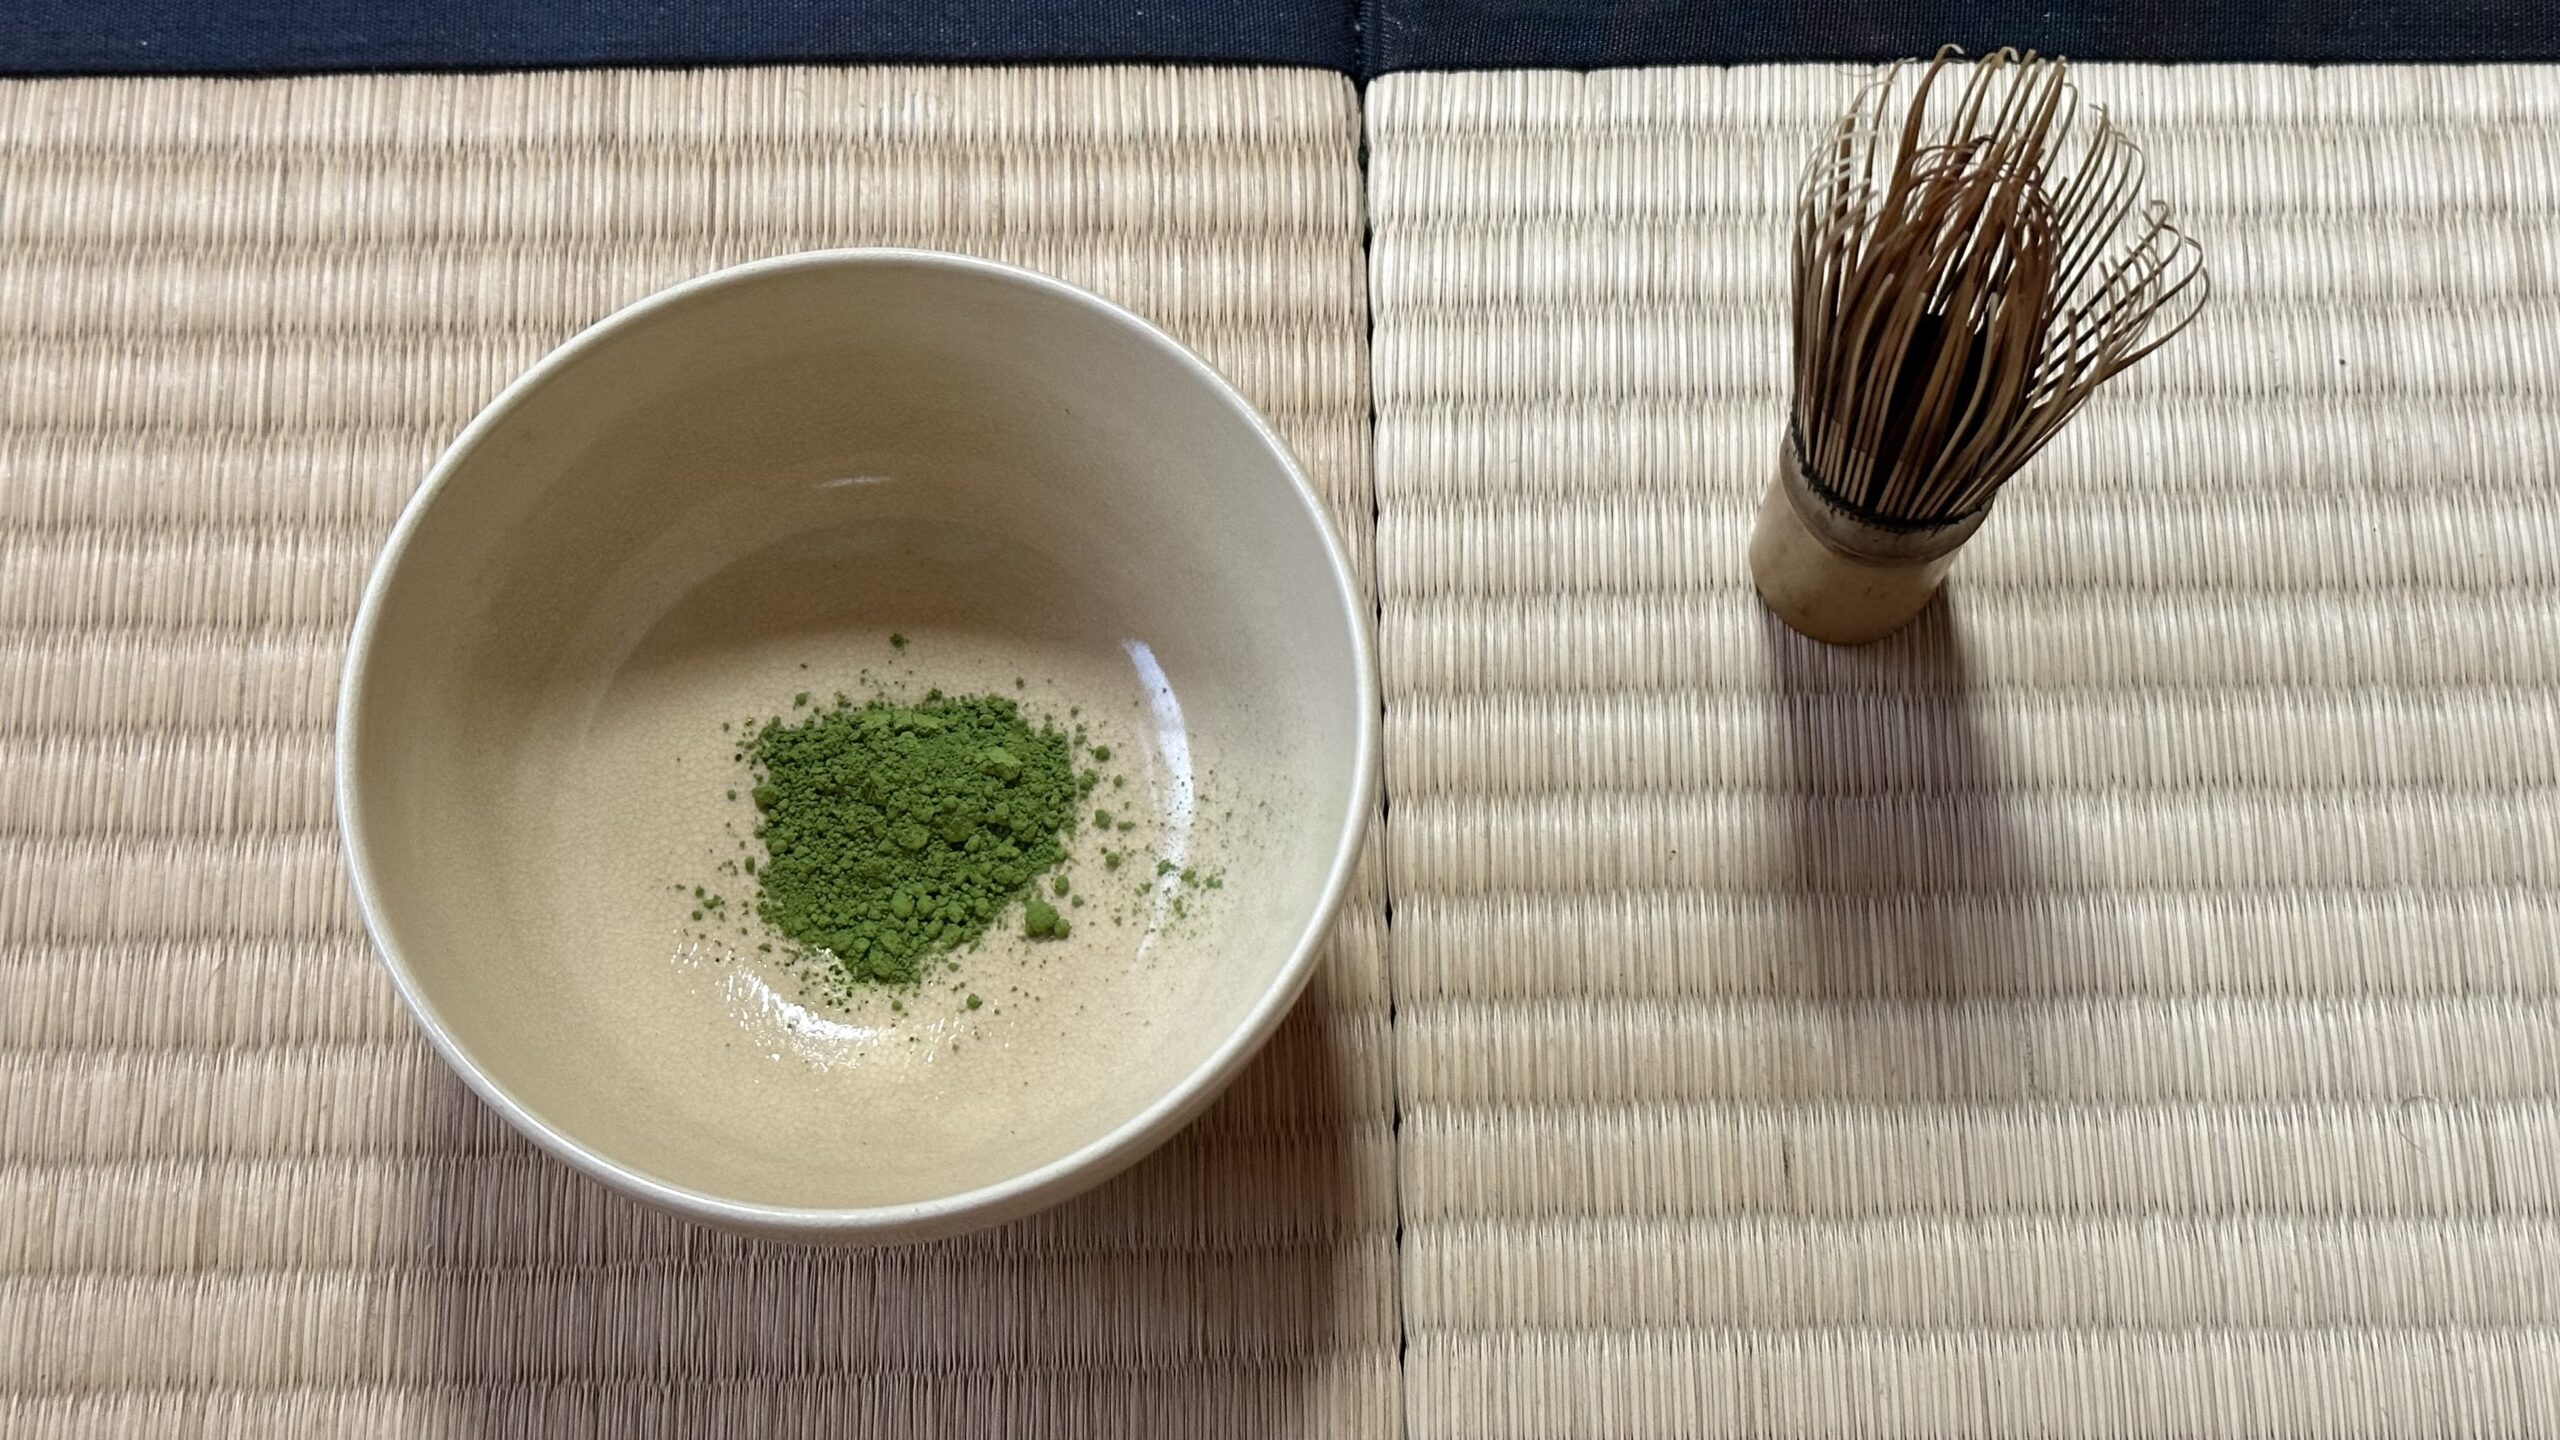 A “whisk”-ful experience in Kyoto